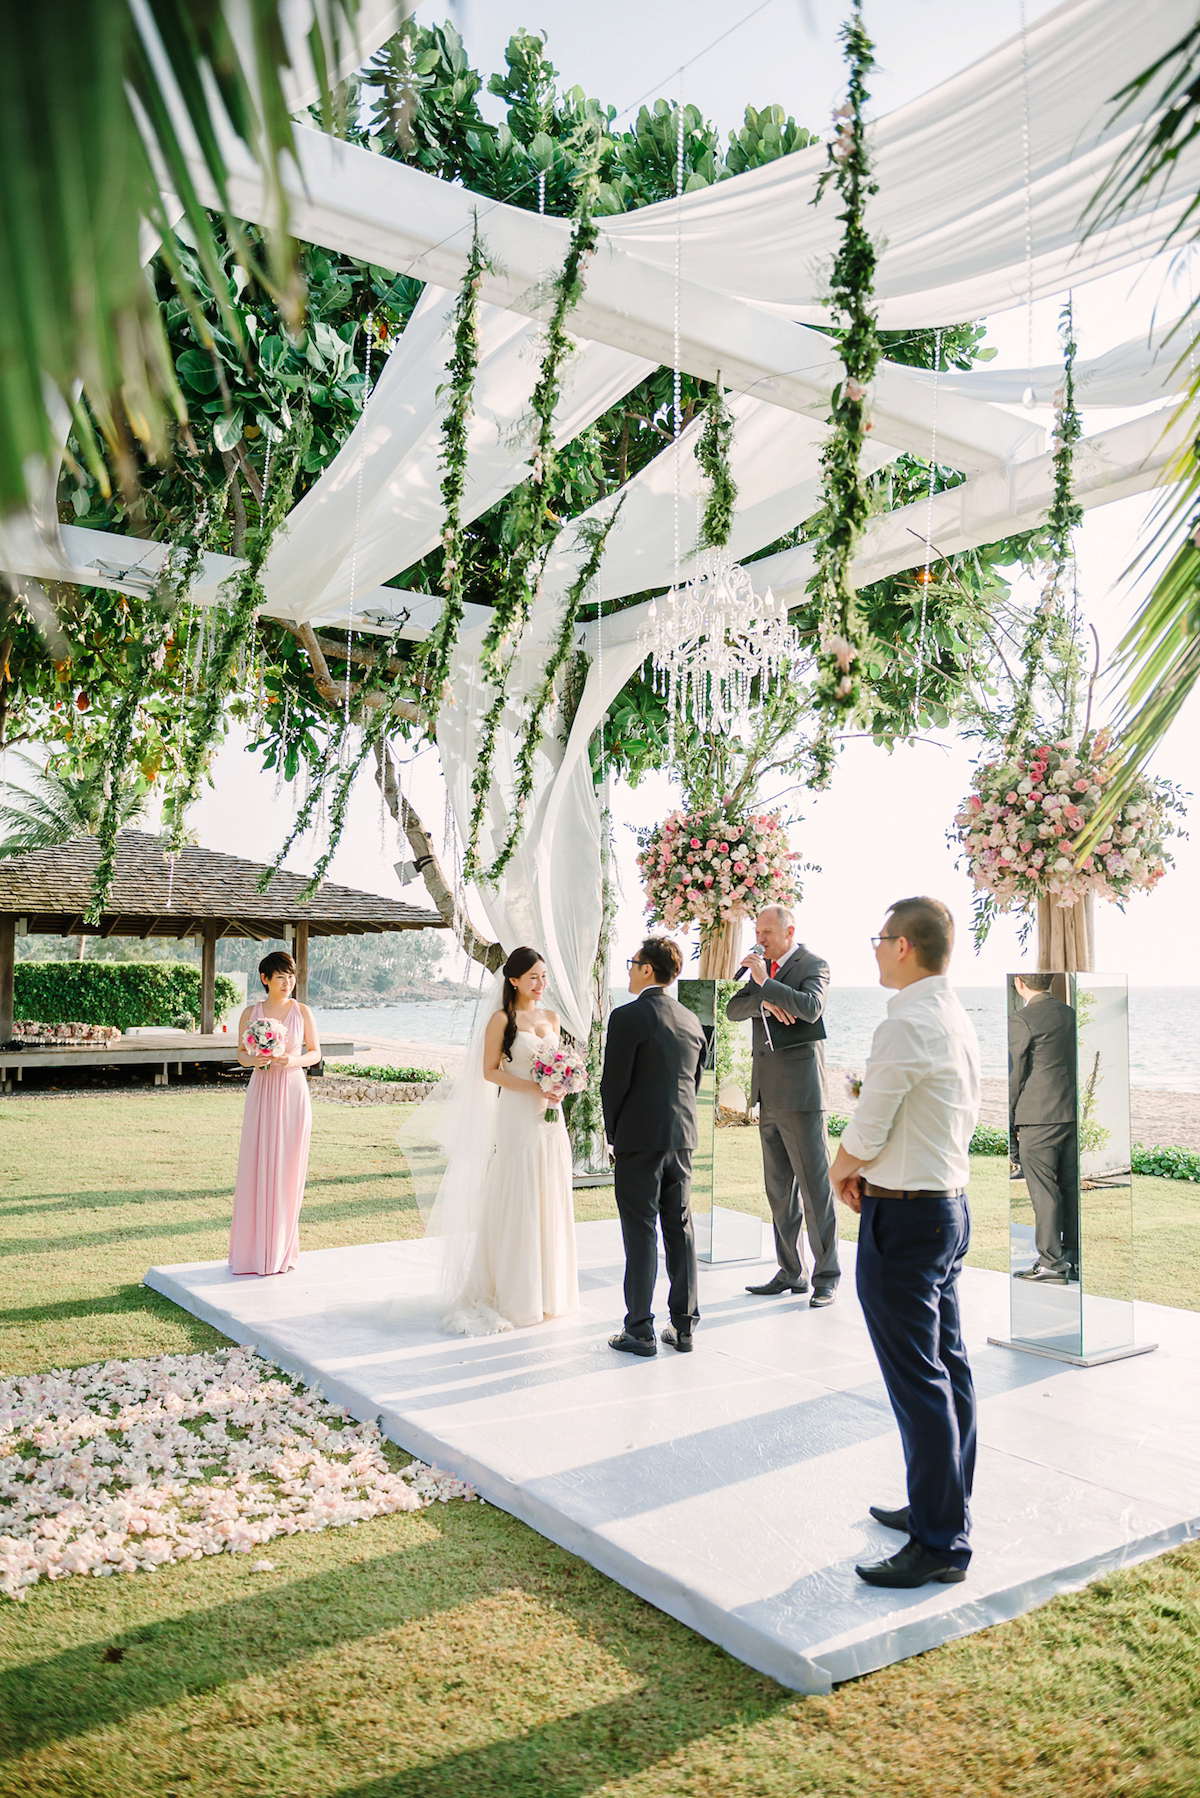 Hong Kiu wore a Jenny Yoo gown and BHLDN tulle skirt for her romantic and elegant wedding in Thailand. The day was planned by 'The Wedding Bliss Thailand'.